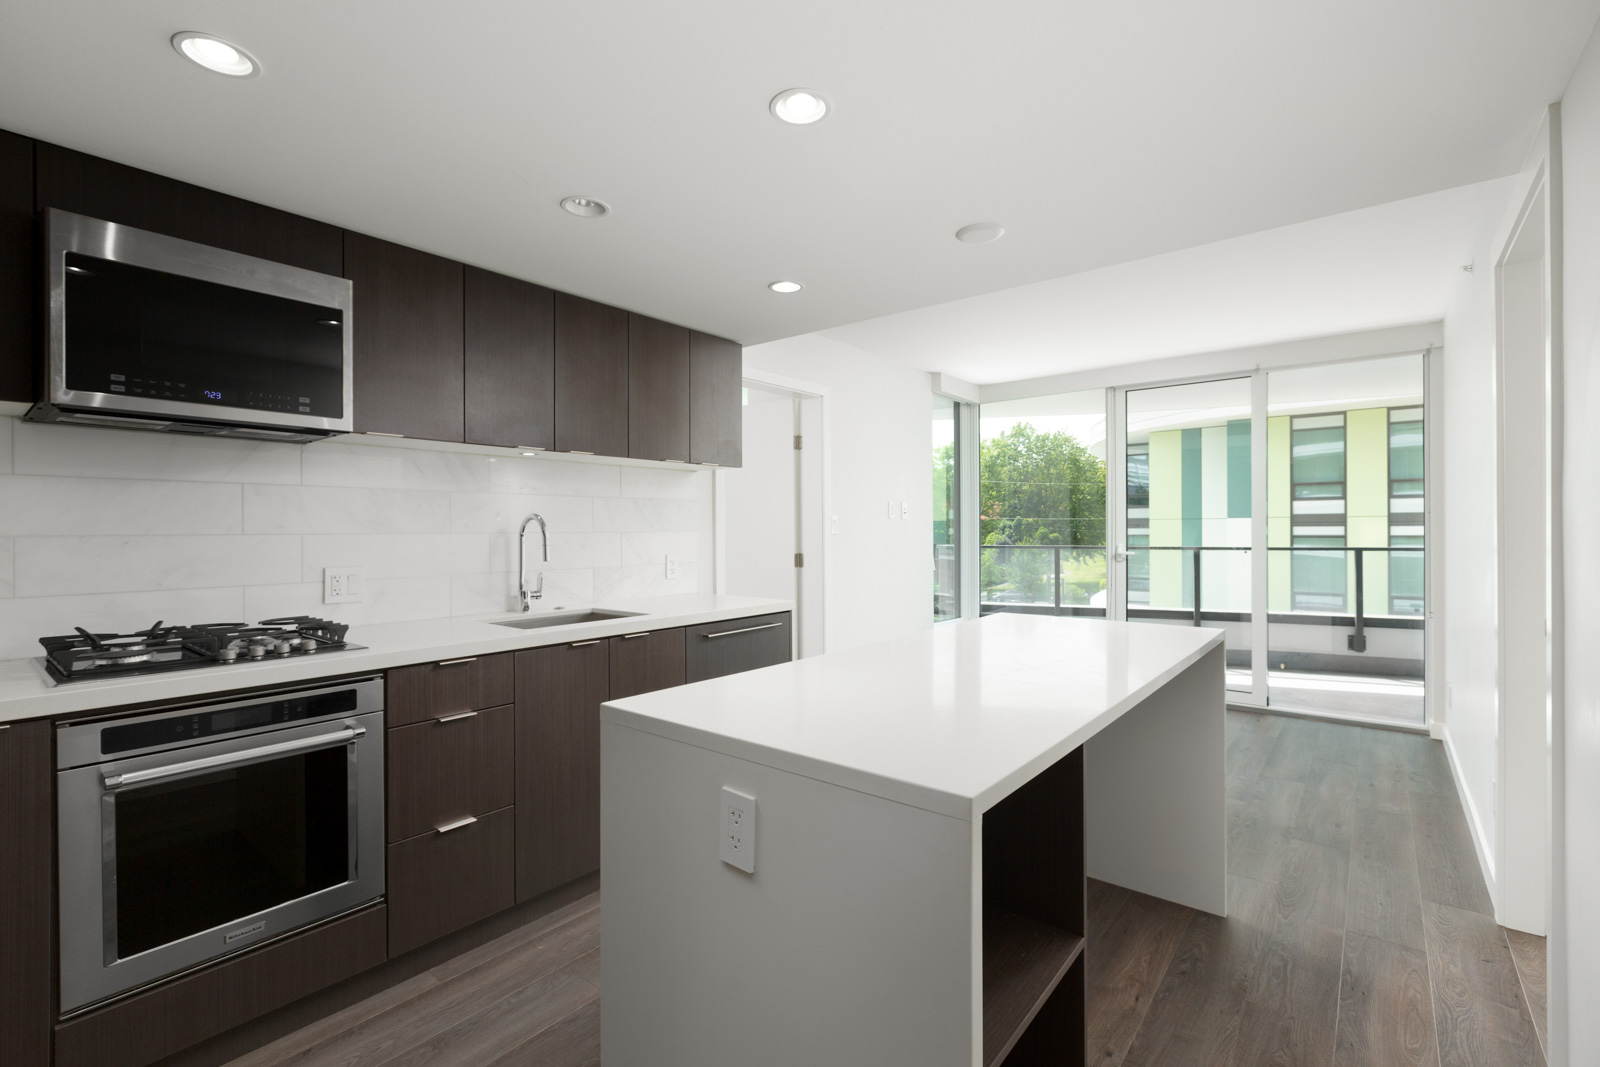 rental condo kitchen and living room at northwest building in cambie and marine gateway neighbourhood of vancouver westside managed by birds nest properties